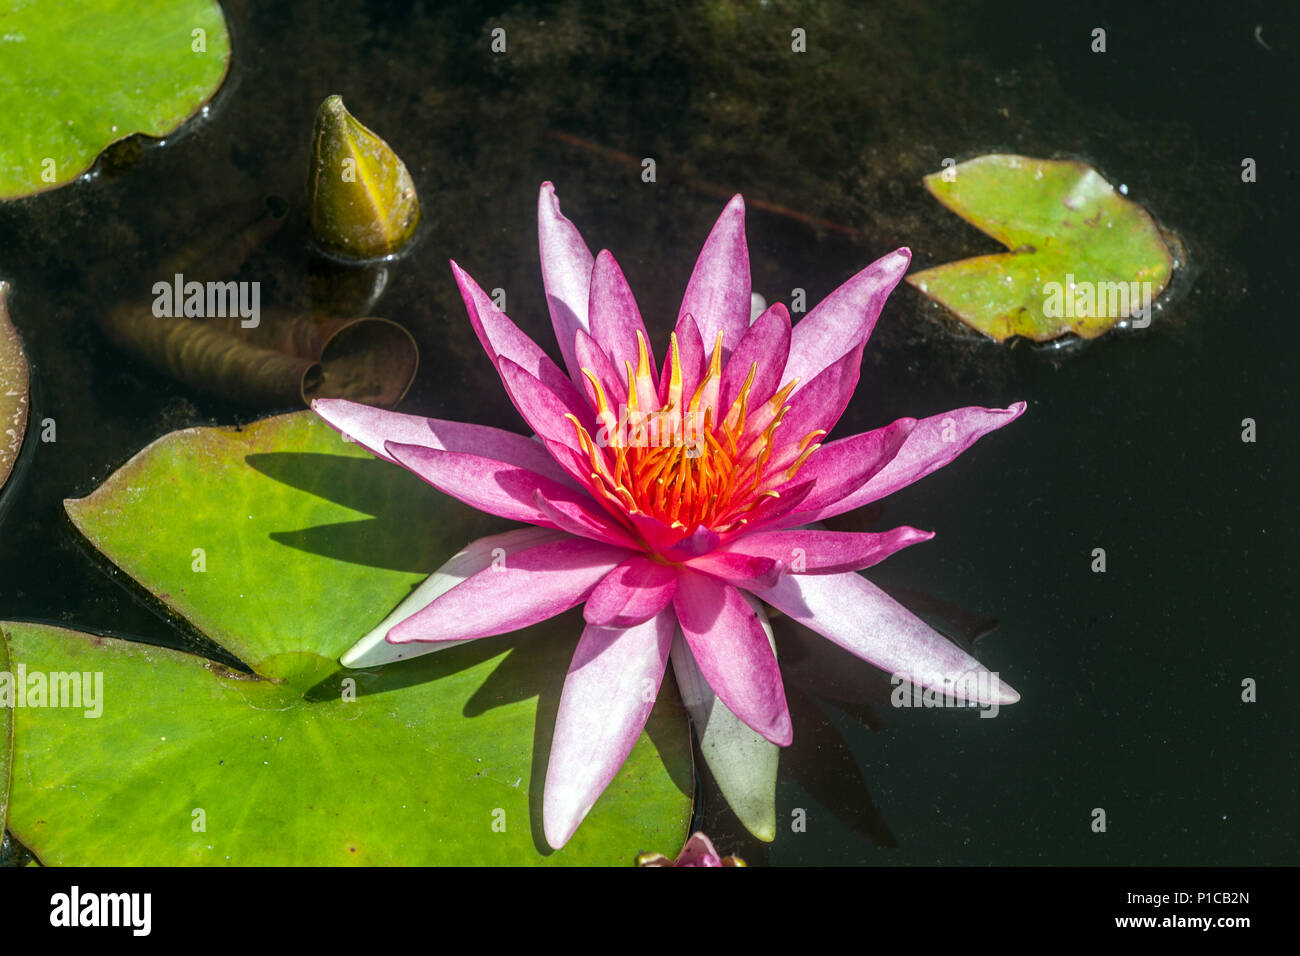 A pink water lily flower in a garden pond Stock Photo